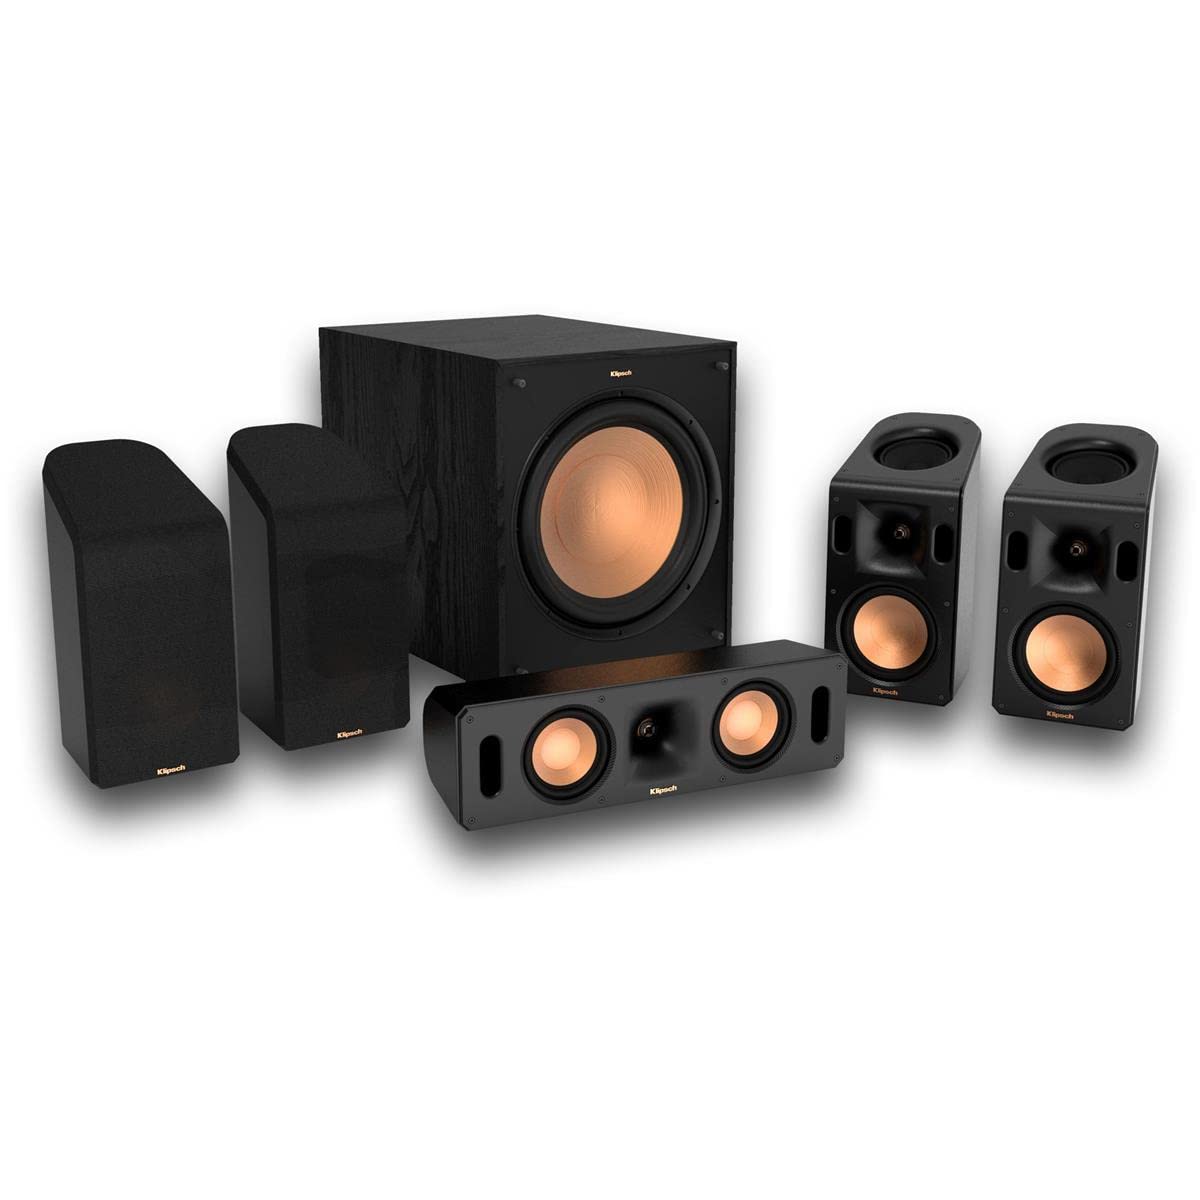 Klipsch Reference Home Theater Cinema Dolby Atmos 5.1.4 System with AVR-S970H 7.2 Receiver, Black